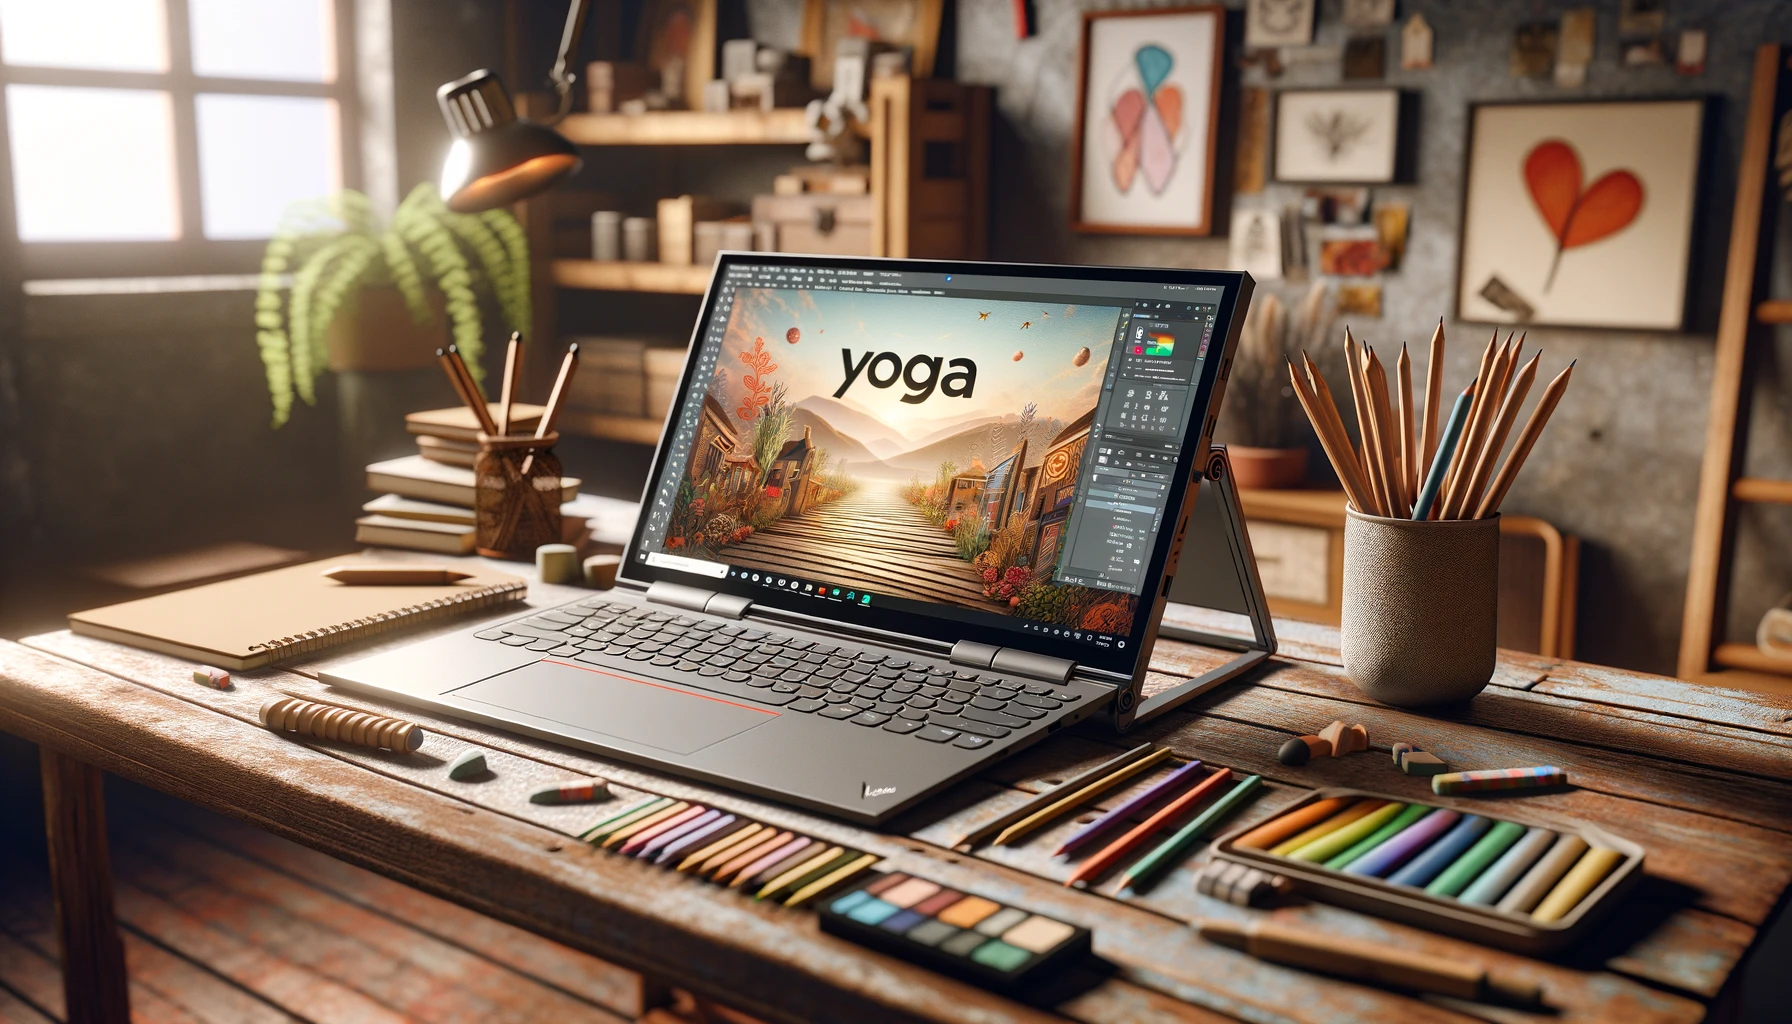 The image above depicts a visually engaging 3D stock photo of a Lenovo Yoga laptop in a creative workspace setting, surrounded by artistic tools and positioned to highlight its versatility and support for creativity and productivity.